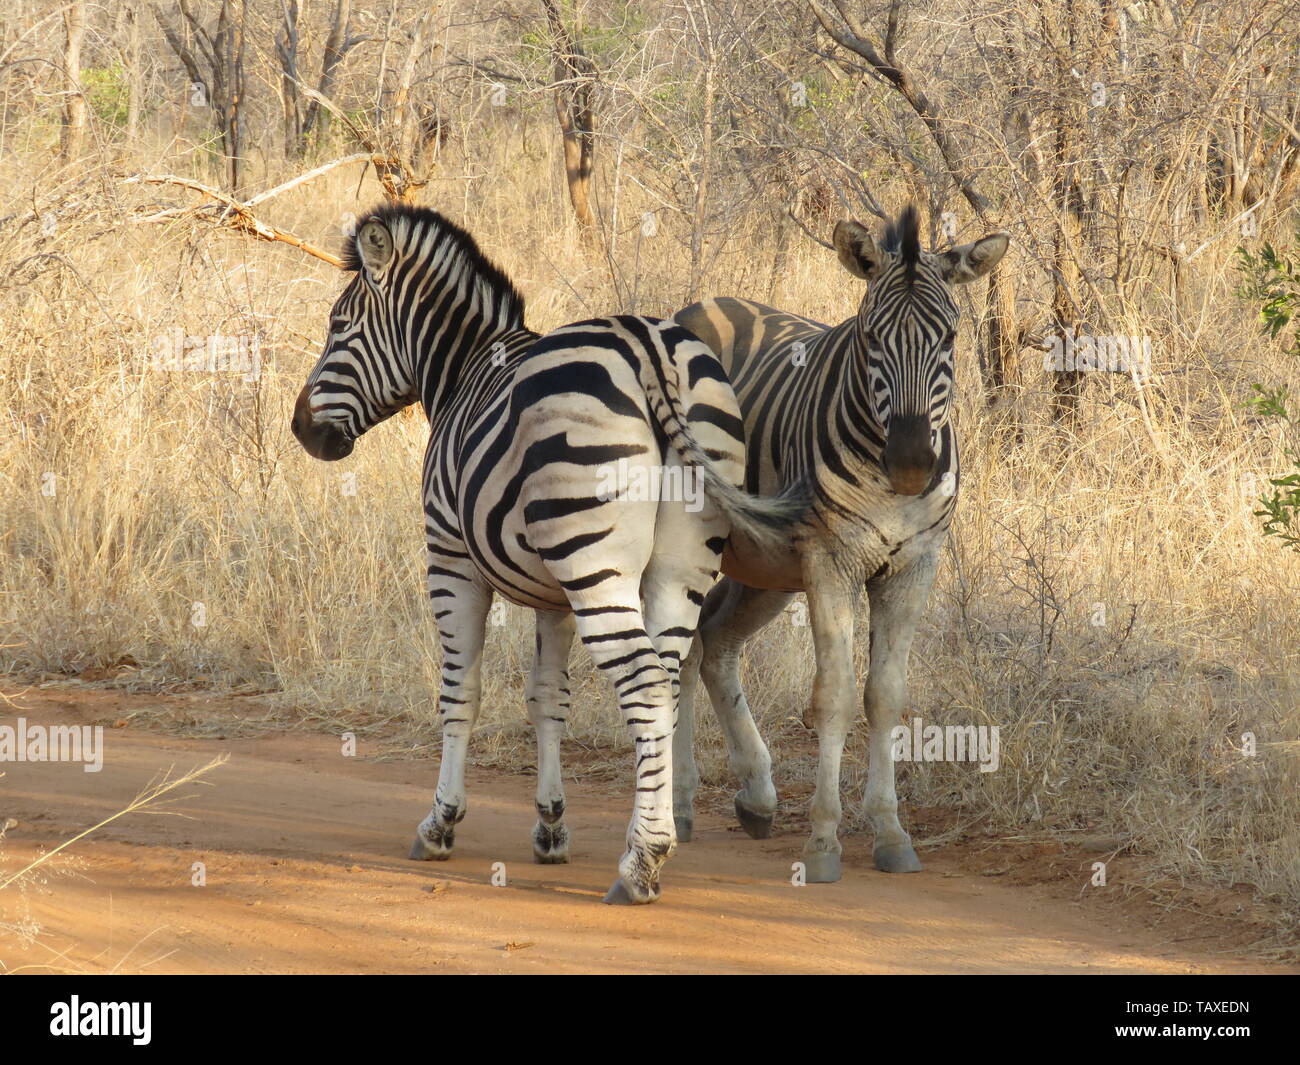 A pair of Zebras back to back in Karongwe Game Reserve, Kruger National Park, South Africa Stock Photo